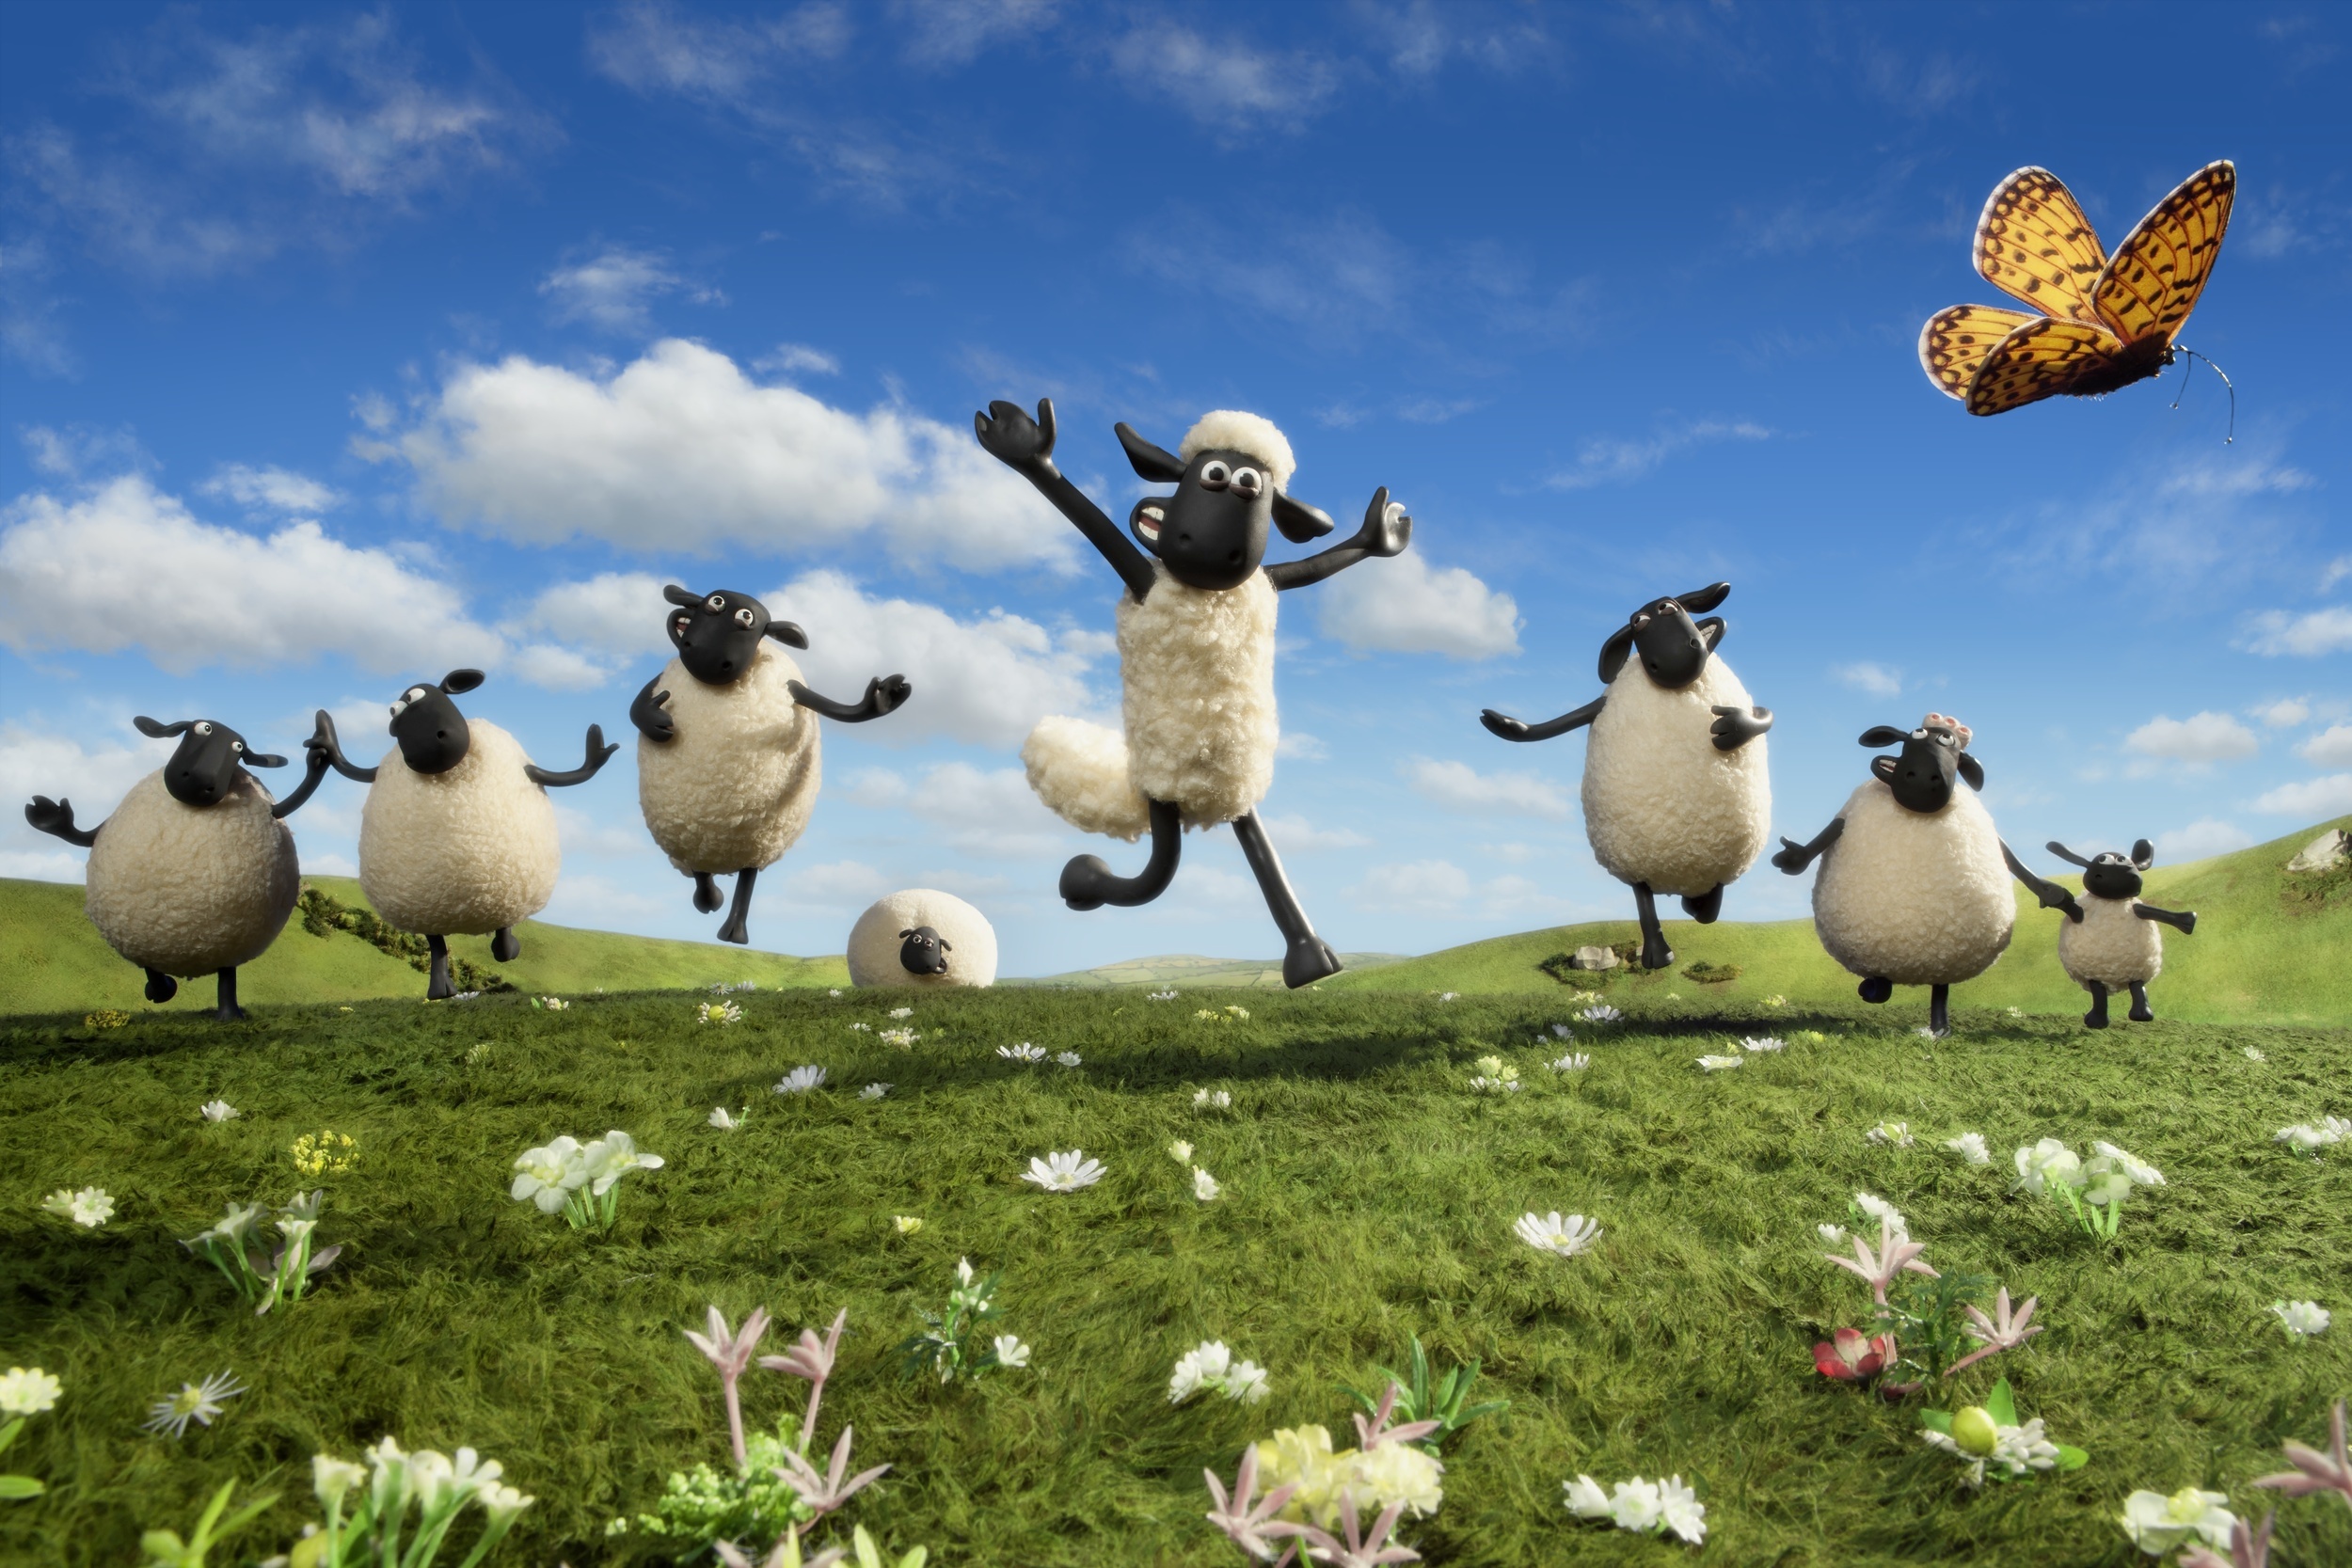 <p>Based on the hugely popular children’s TV series, Aardman’s <em>Shaun the Sheep Movie</em> is a bona fide hit and even an Oscar nominee. When The Farmer goes missing, Shaun and the flock travel to the Big City to find him. Despite featuring zero dialogue, just like the show, the film is full of hilarious moments and references and is also surprisingly emotional. <em>Shaun the Sheep</em>’s first movie was followed by the 2019 sequel <em>Farmageddon</em>, which is just as much fun. </p><p>You may also like: <a href='https://www.yardbarker.com/entertainment/articles/24_movies_played_at_every_sleepover_in_the_90s_012524/s1__38802946'>24 movies played at every sleepover in the '90s</a></p>